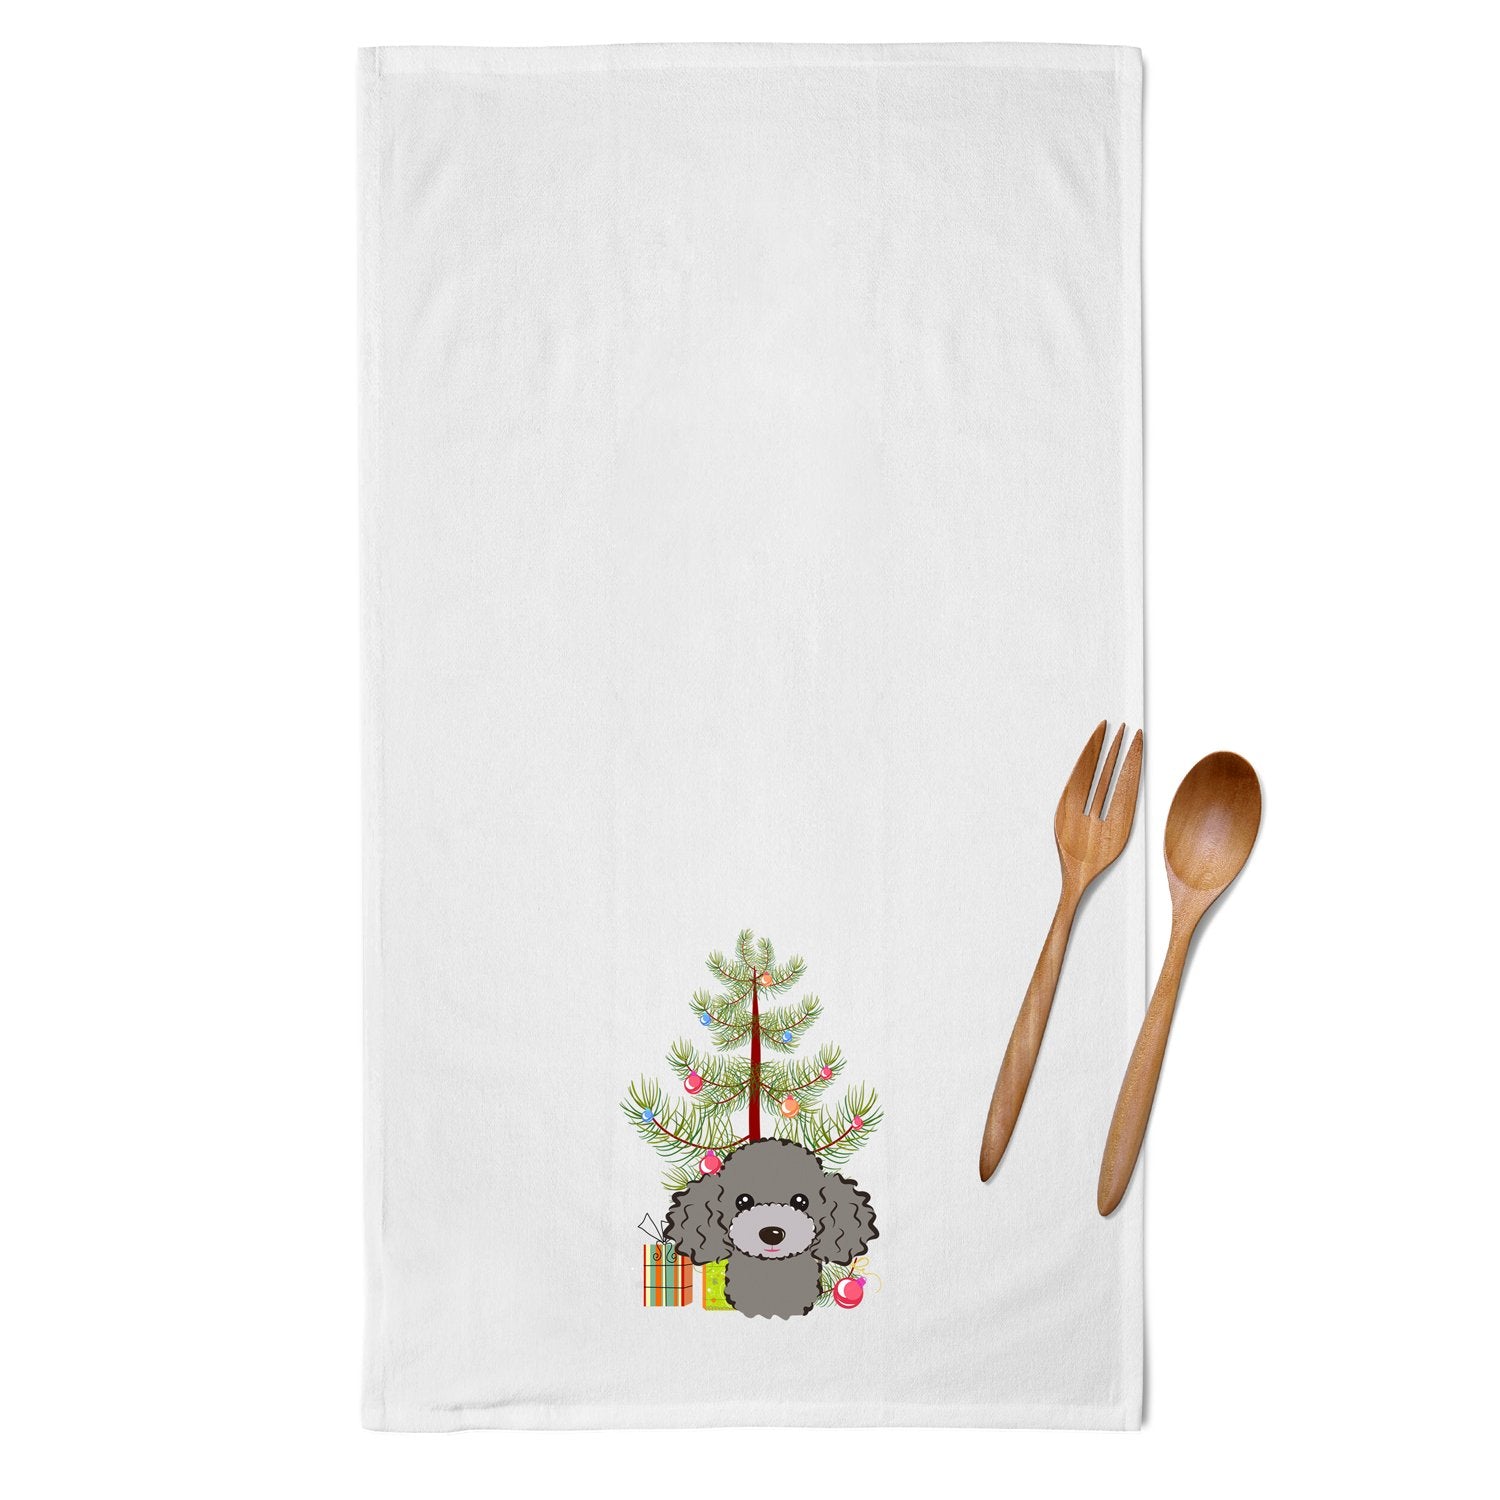 Christmas Tree and Silver Gray Poodle White Kitchen Towel Set of 2 BB1631WTKT by Caroline's Treasures